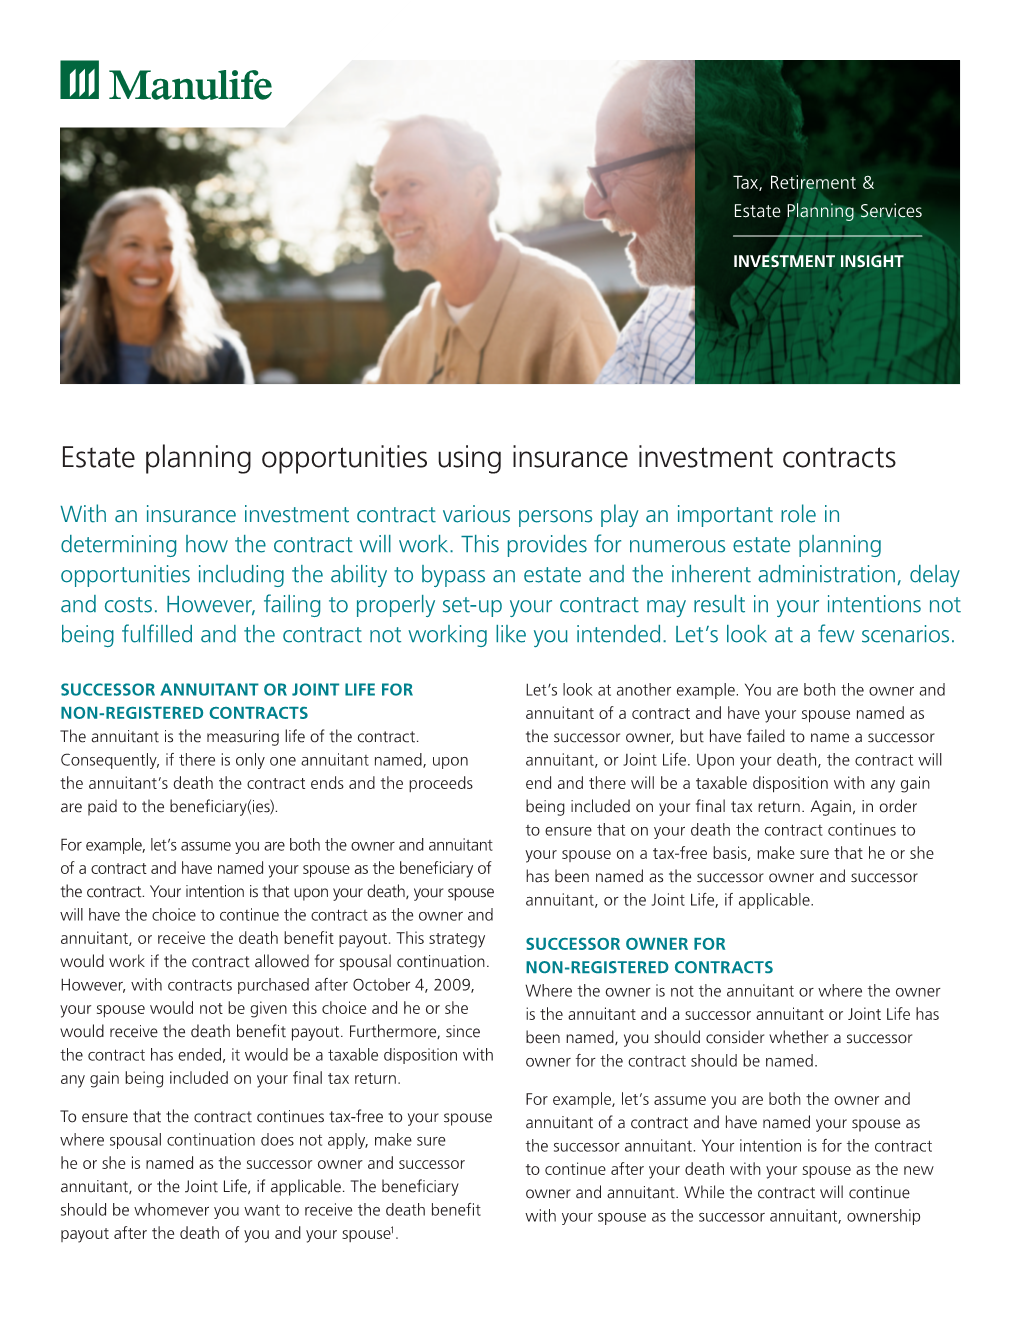 Estate Planning Opportunities Using Insurance Investment Contracts